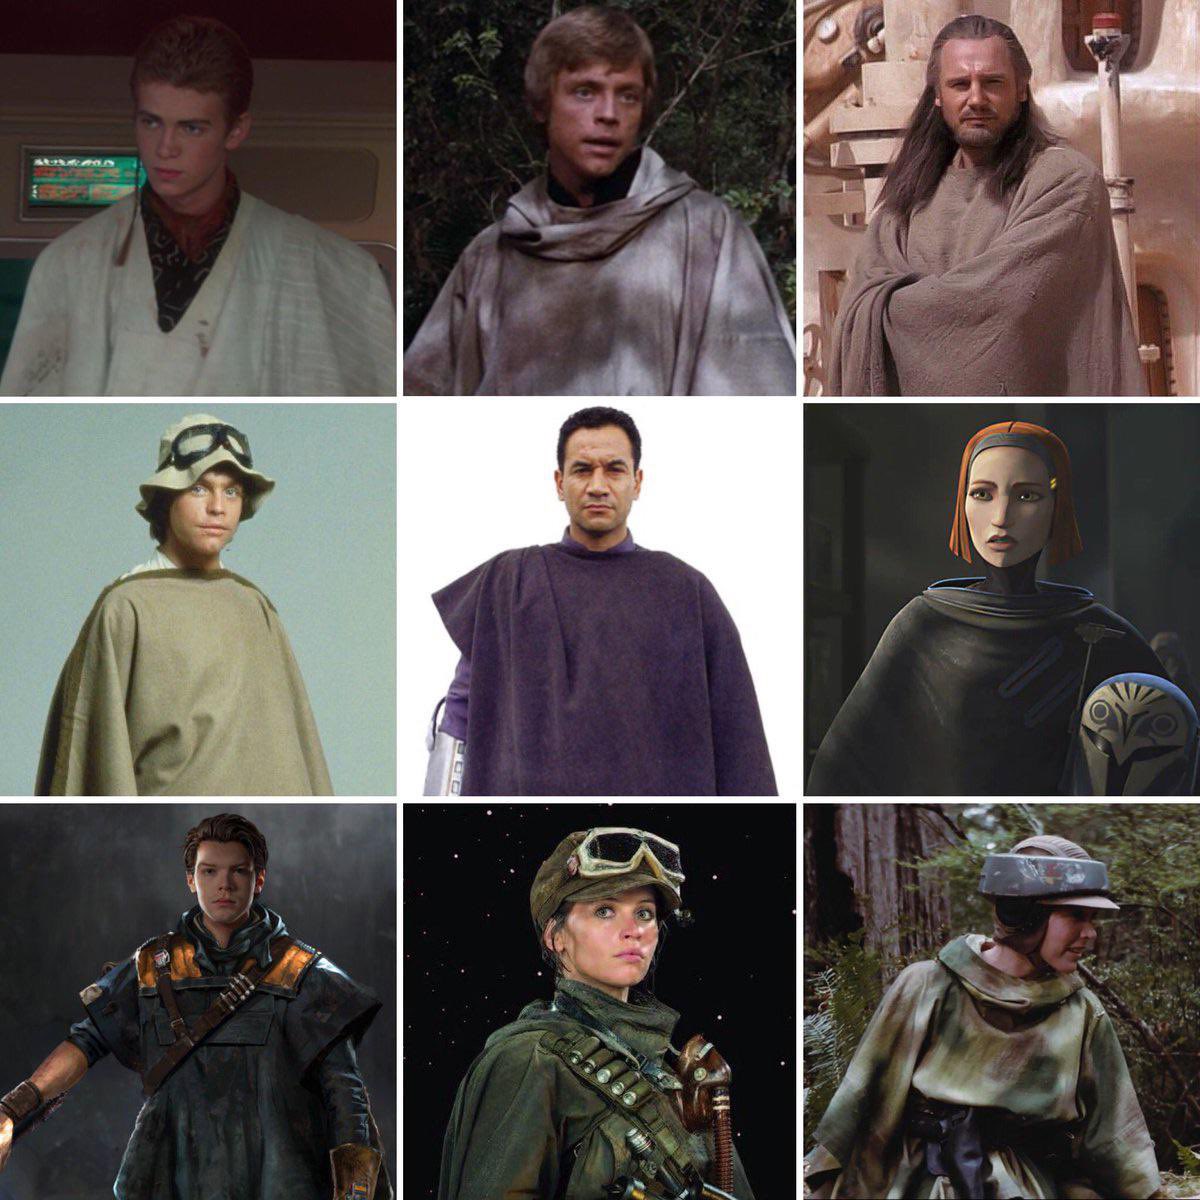 Who wore the Poncho best?

#StarWars